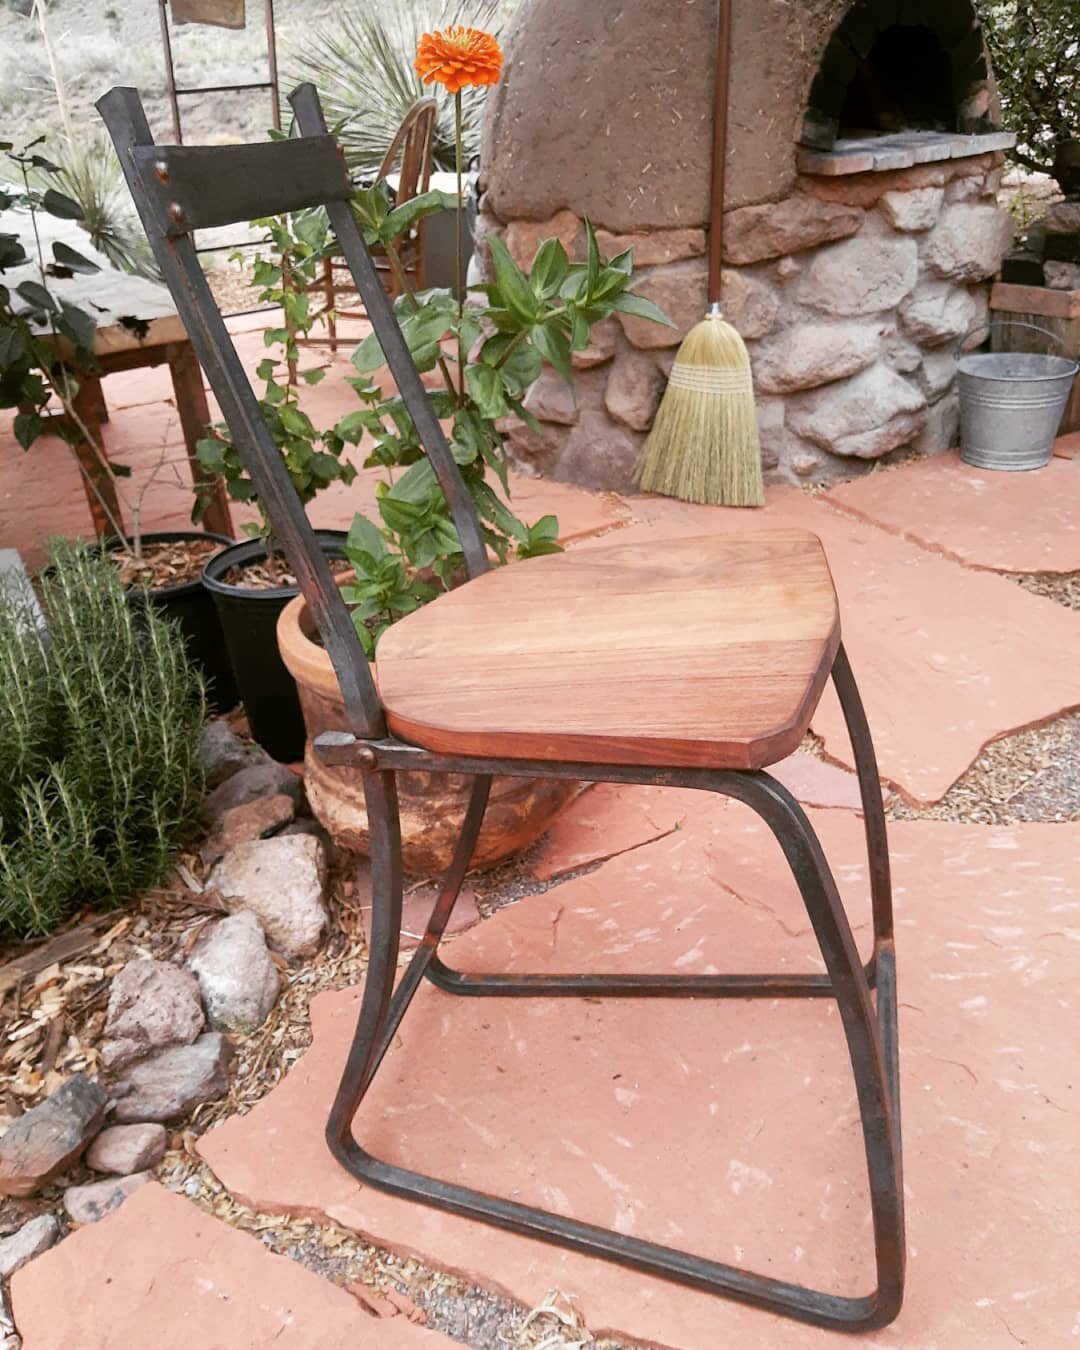 Forged chair with a walnut seat.
.
.
.
#blacksmithing #blacksmith #forged #furniture #furnituredesign #outdoors #woodfiredoven #design #walnut #supportsmallbusiness #supportlocalartists #wip #southwest #silvercitynm #silvercity #handcrafted #handforg